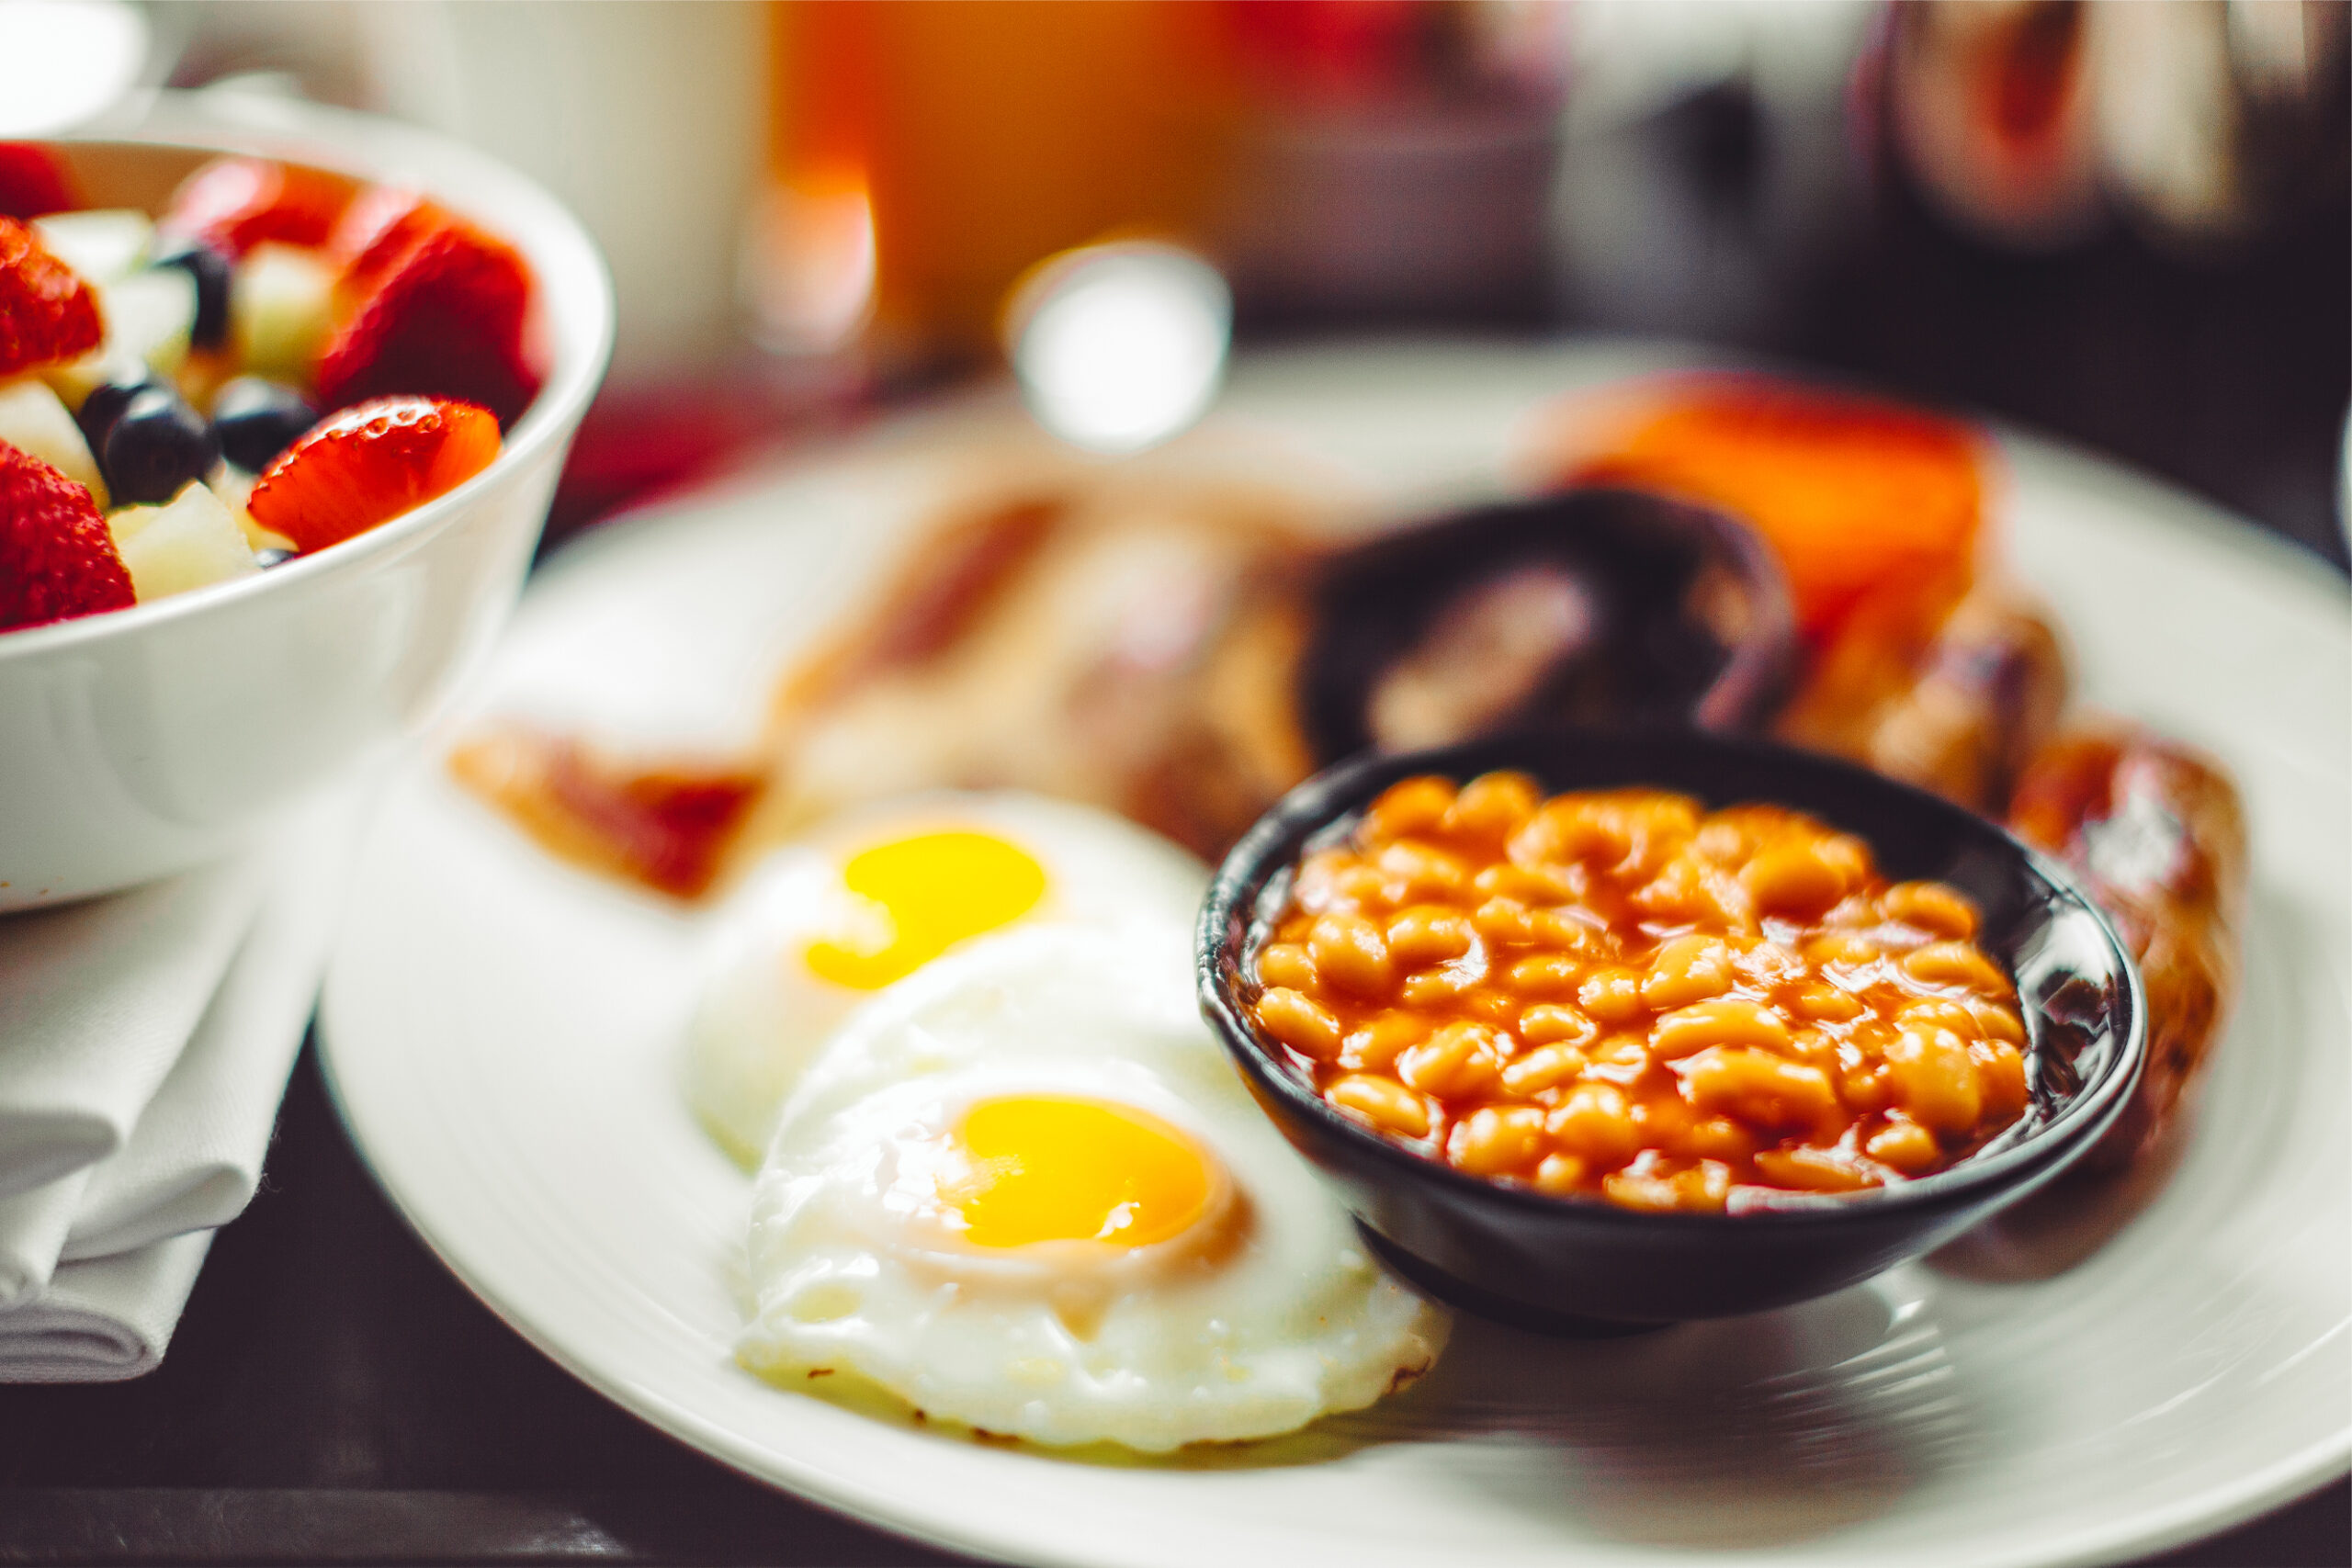 A Traditional Full English Breakfast